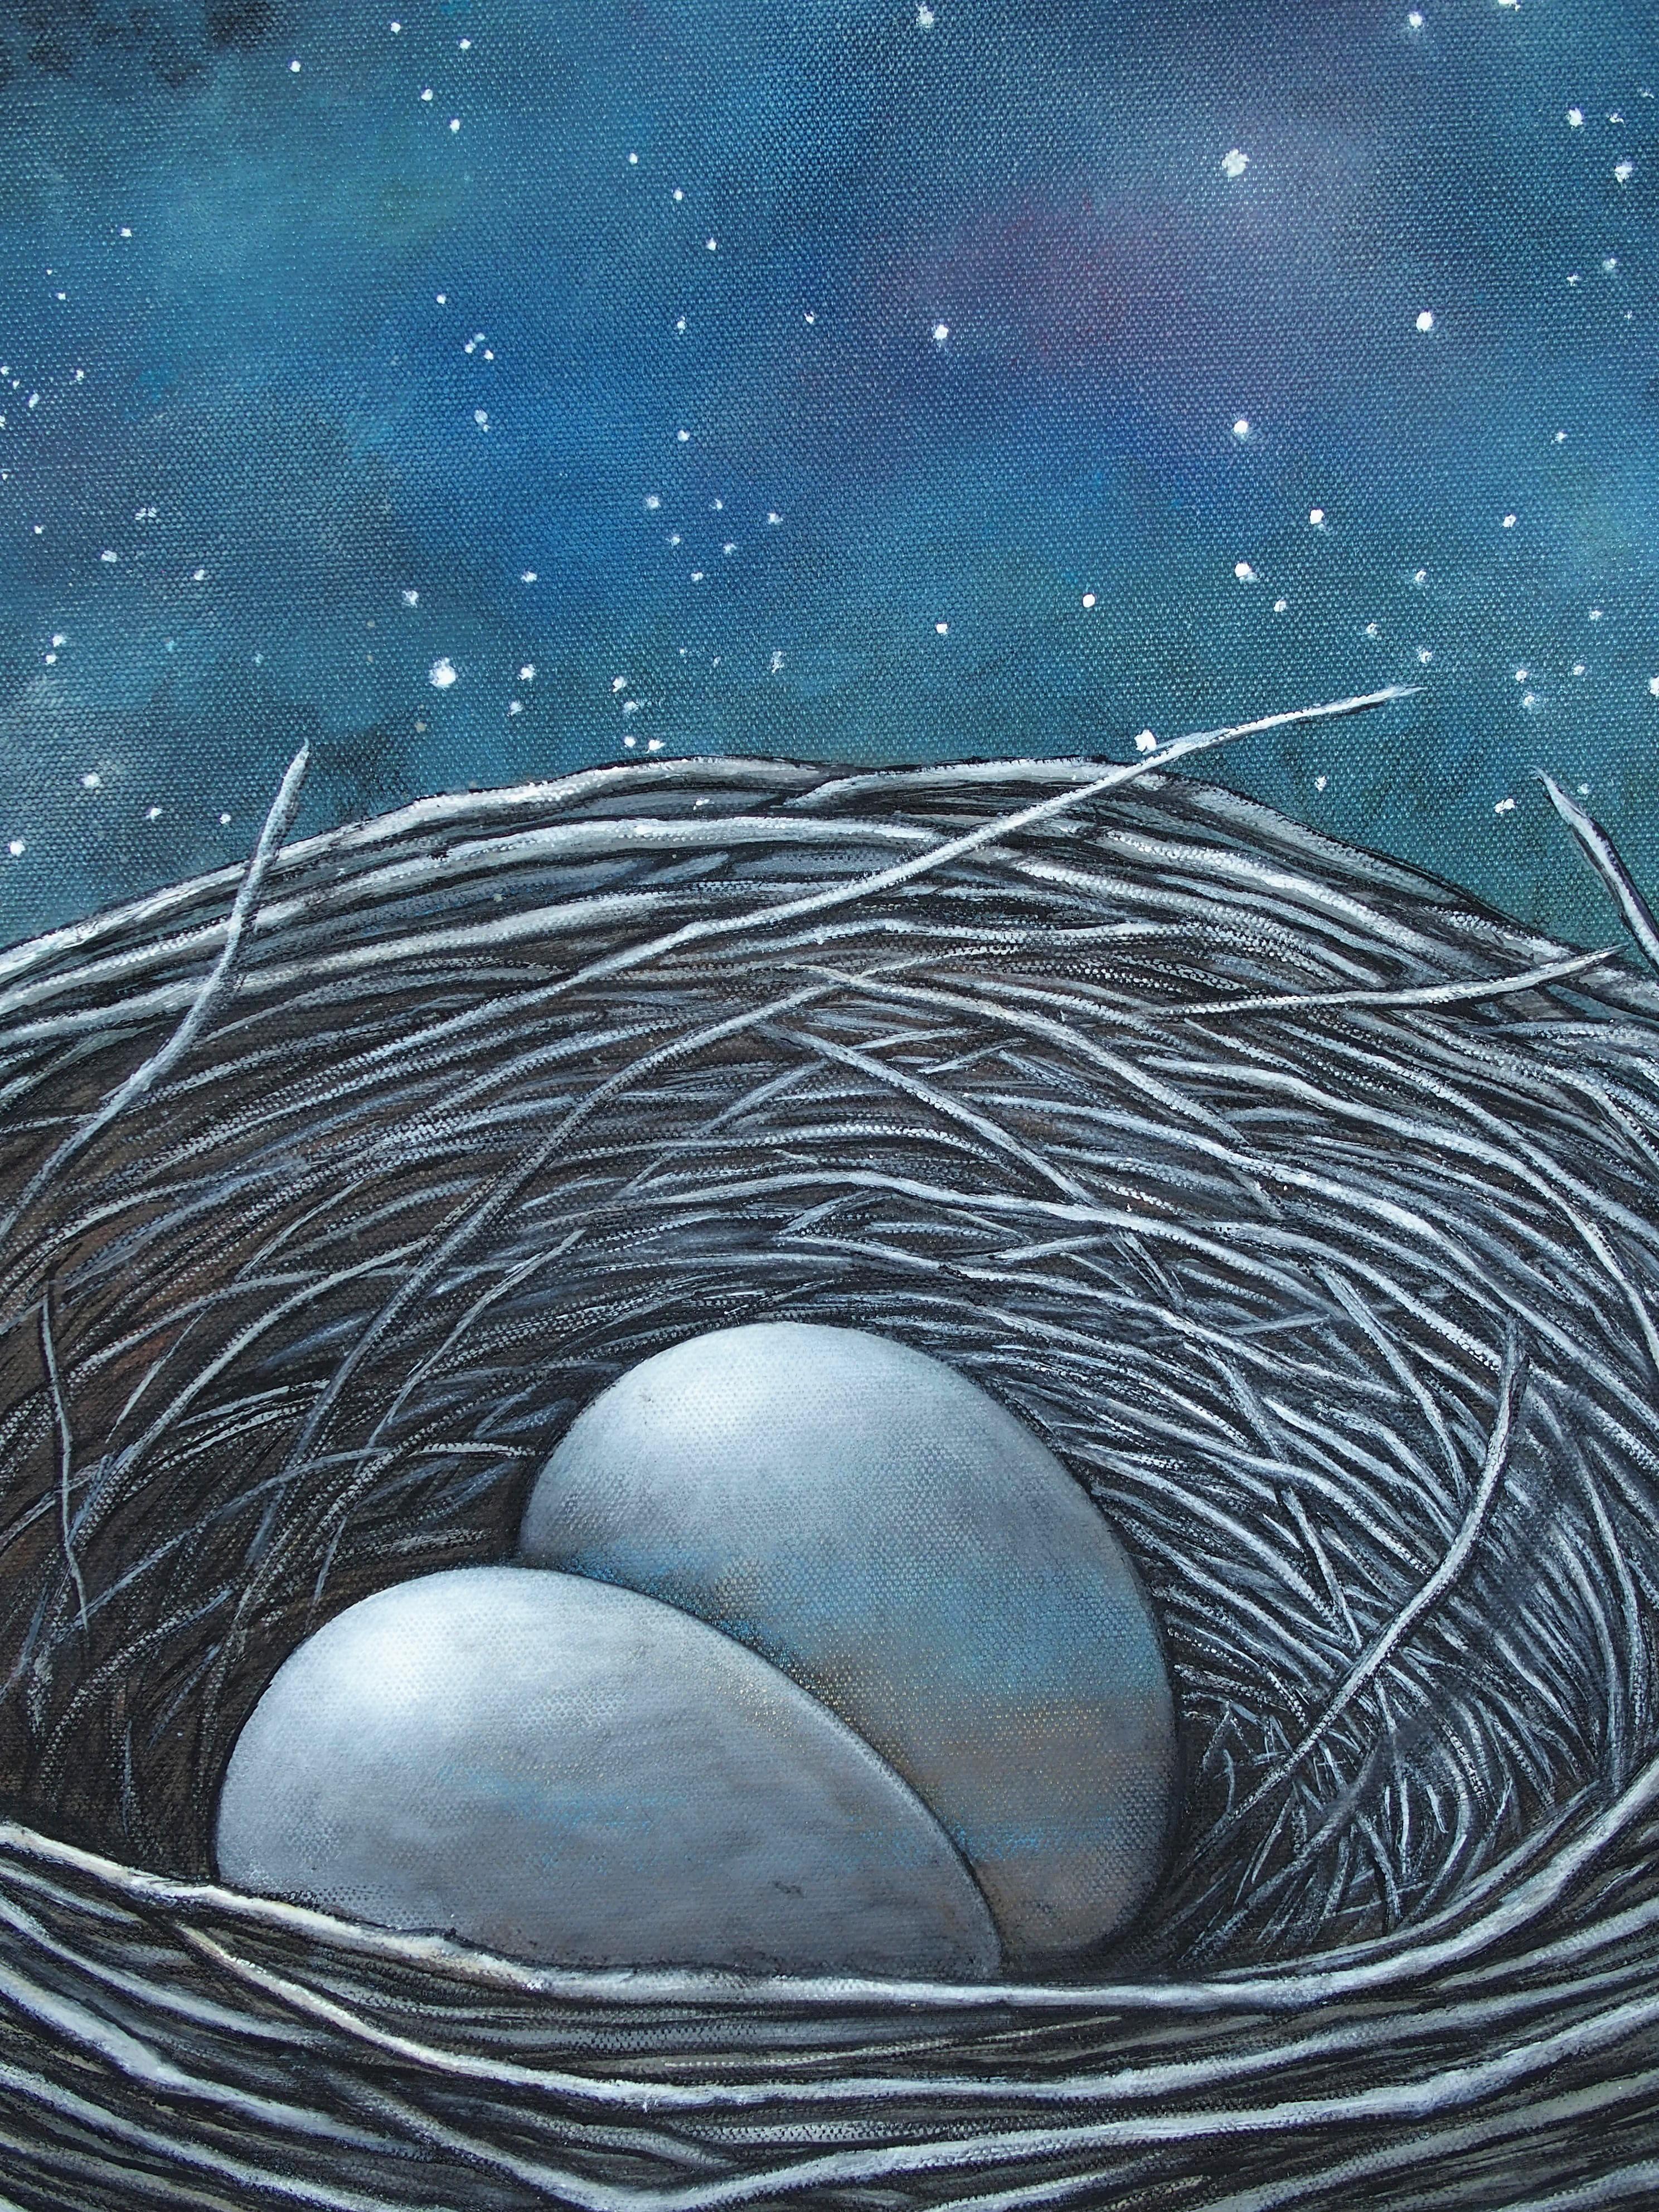 <p>Artist Comments<br />A bird's nest with a dramatic starry night sky in the background. The title is a quote from Victor Hugo. The background is continued onto the sides of the gallery wrapped canvas.</p><p>About the Artist<br />Jennifer Ross grew